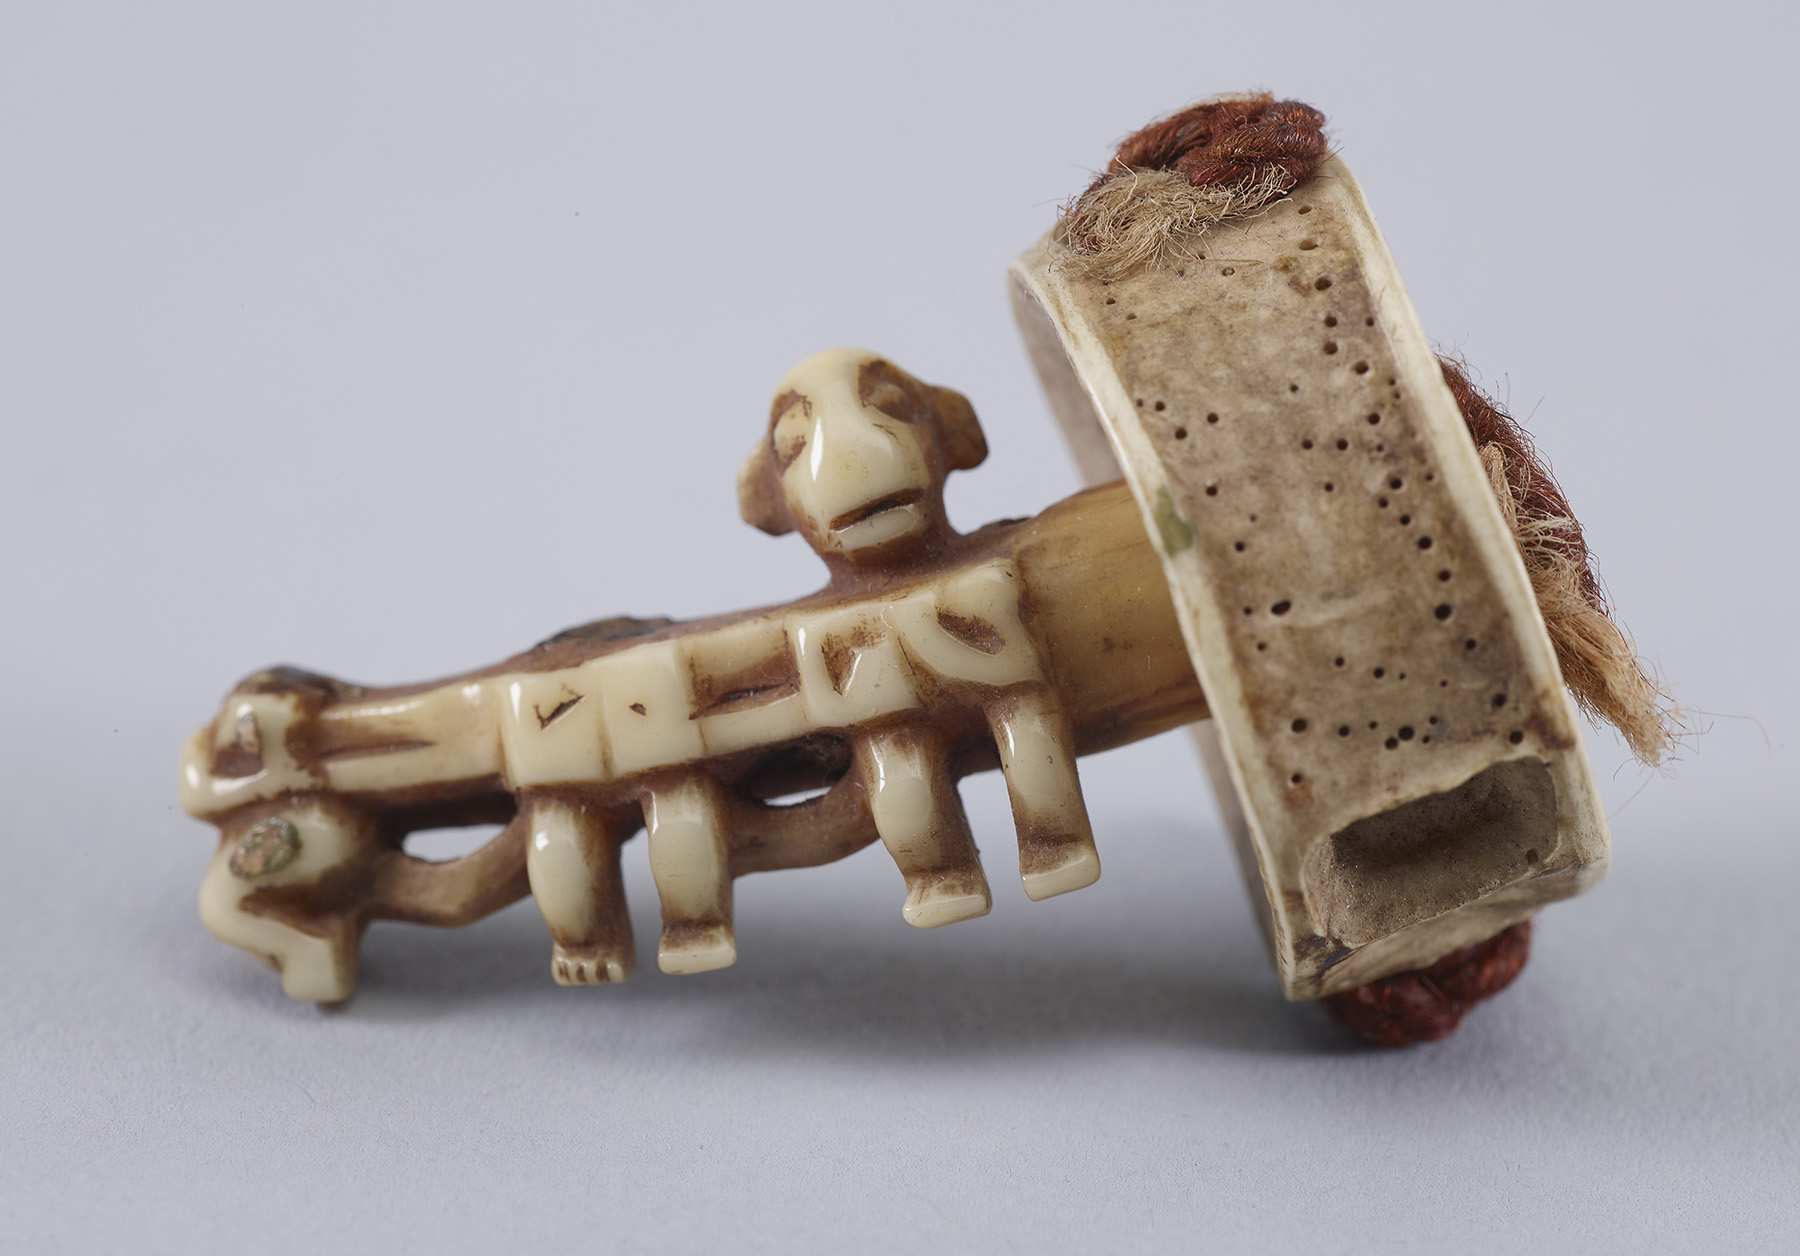 Ear ornament carved from whale teeth with human figures